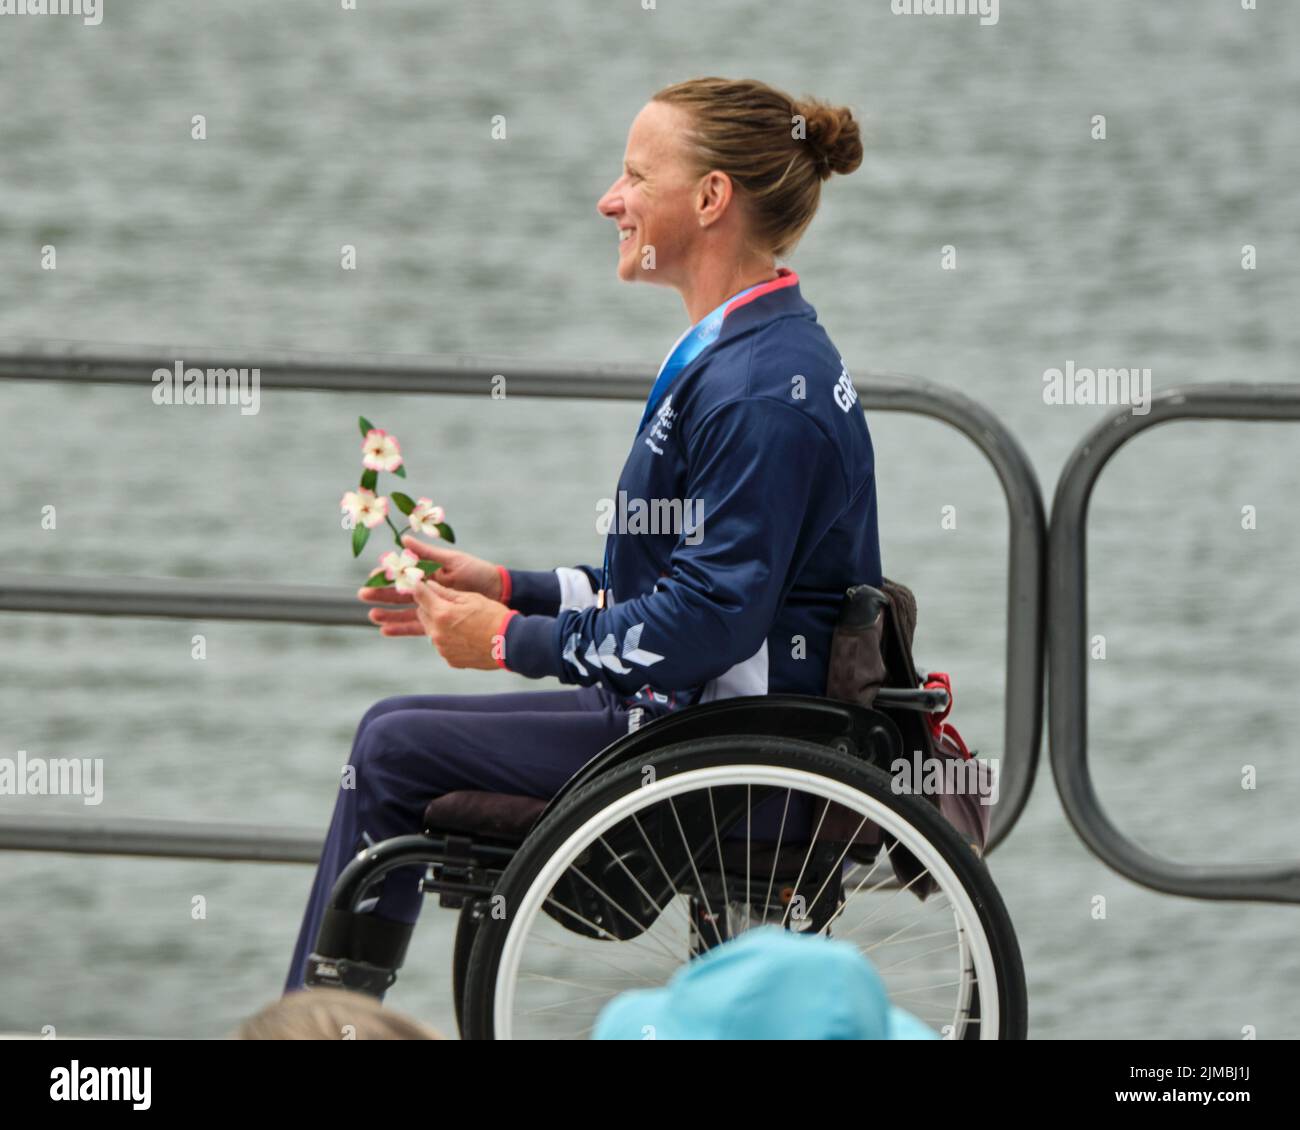 Dartmouth, Canada. August 5th, 2022. Emma Wiggs from Great Britain during the National Anthems as she receives her Gold Medal in the Women Paracanoe VL3 200m World Championships race. This is Wiggs tenth world title to date. Brianna Hennessy from Canada takes Silver and Jeanette Chippington from Great Britain takes bronze. The 2022 ICF Canoe Sprint and Paracanoe World Championships takes place on Lake Banook in Dartmouth (Halifax). Credit: meanderingemu/Alamy Live News Stock Photo